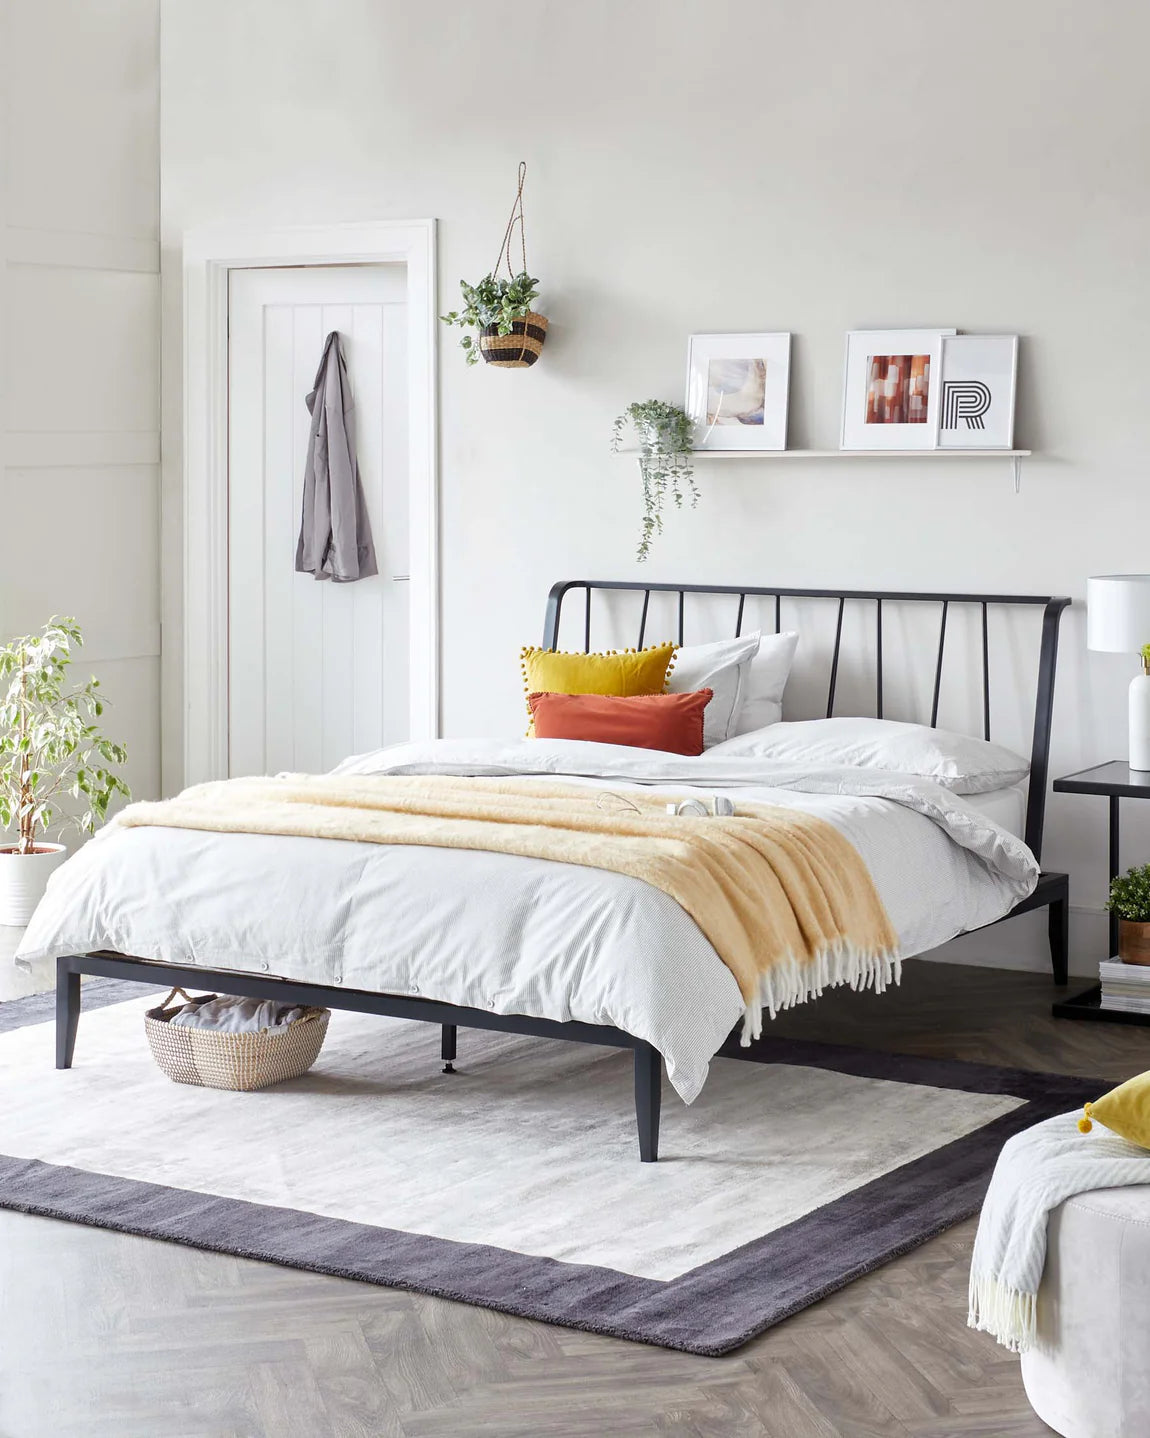 Create Your a Modern Bedroom Aesthetic with Contemporary Metal Beds